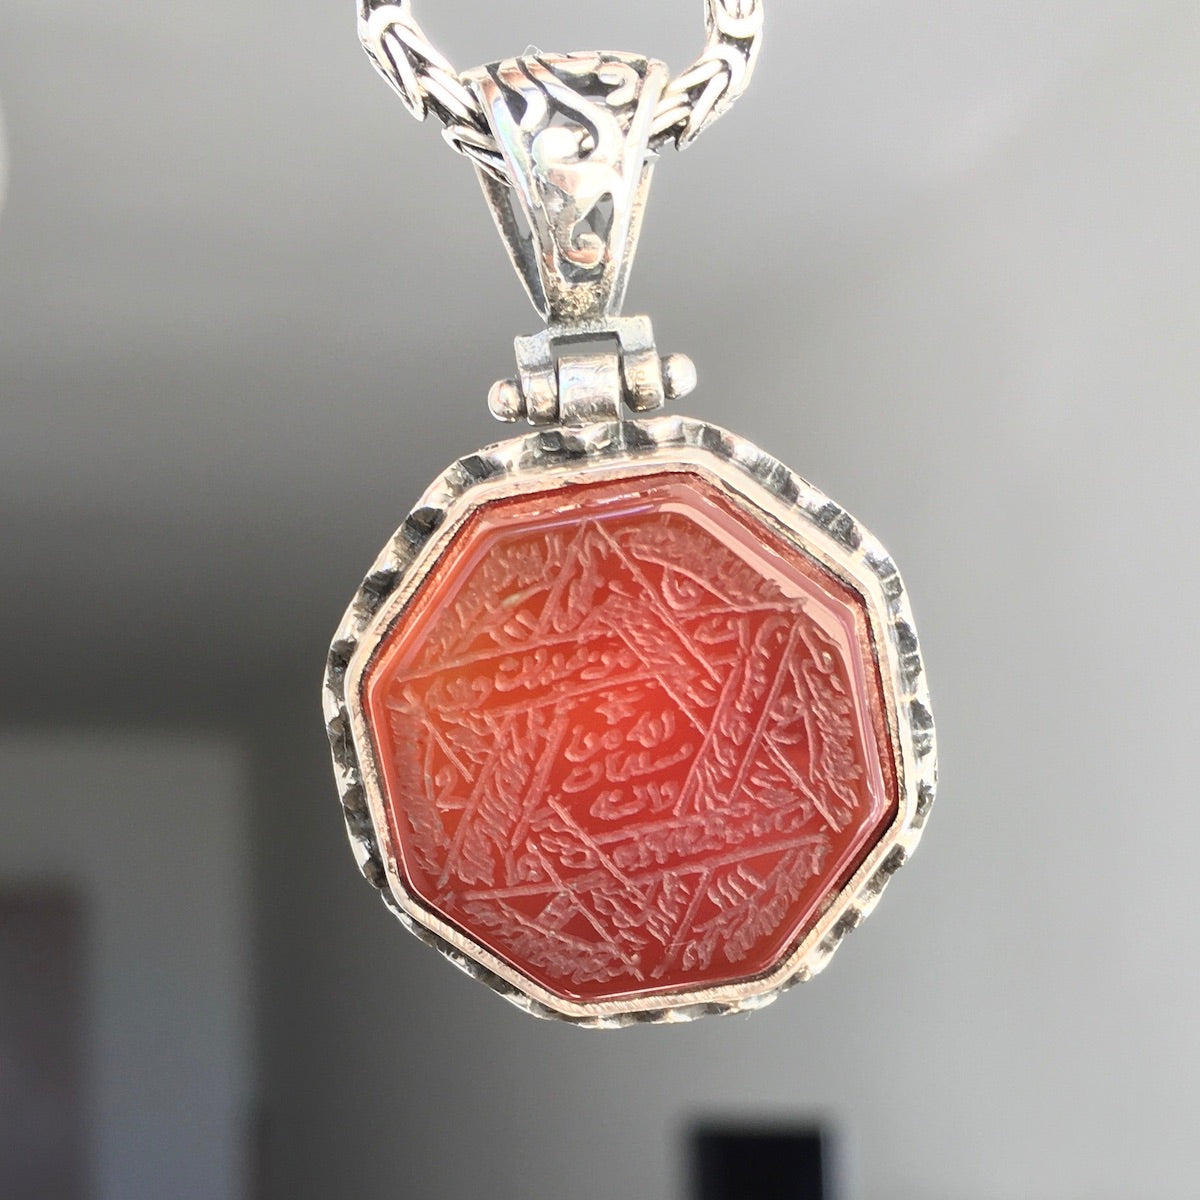 Agate Pendant Handmade 925 Sterling Silver Seal of Solomon engraved Talisman incl. Kings Chain Necklace